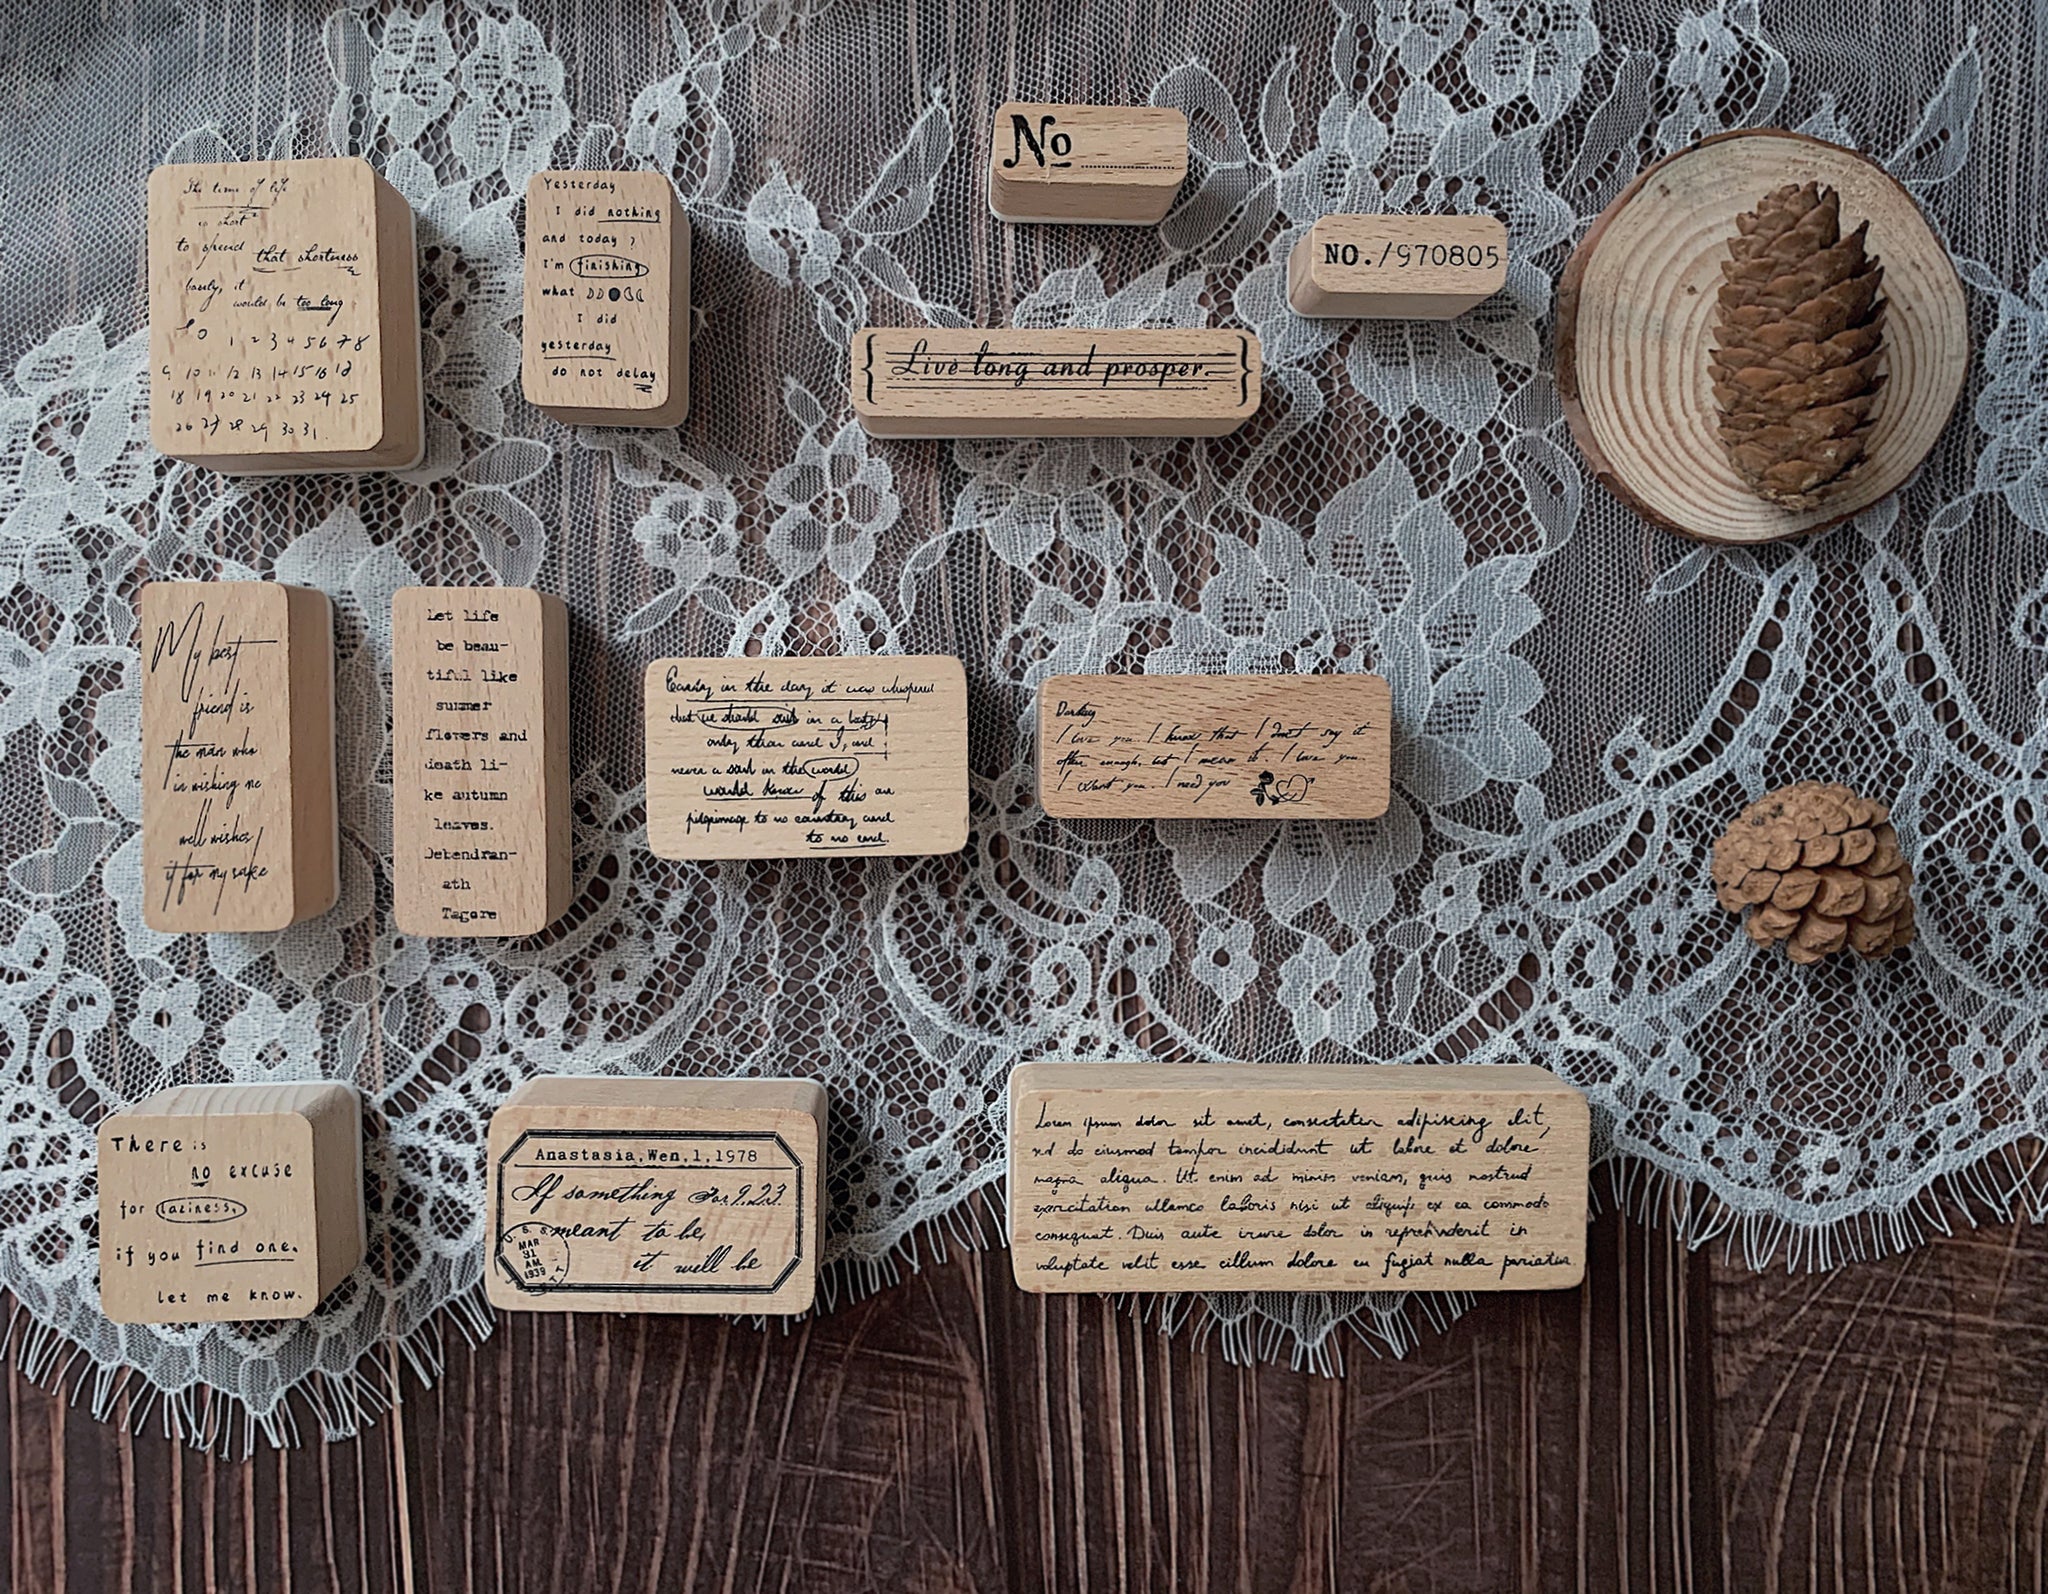 Words and Phrases Rubber Stamps